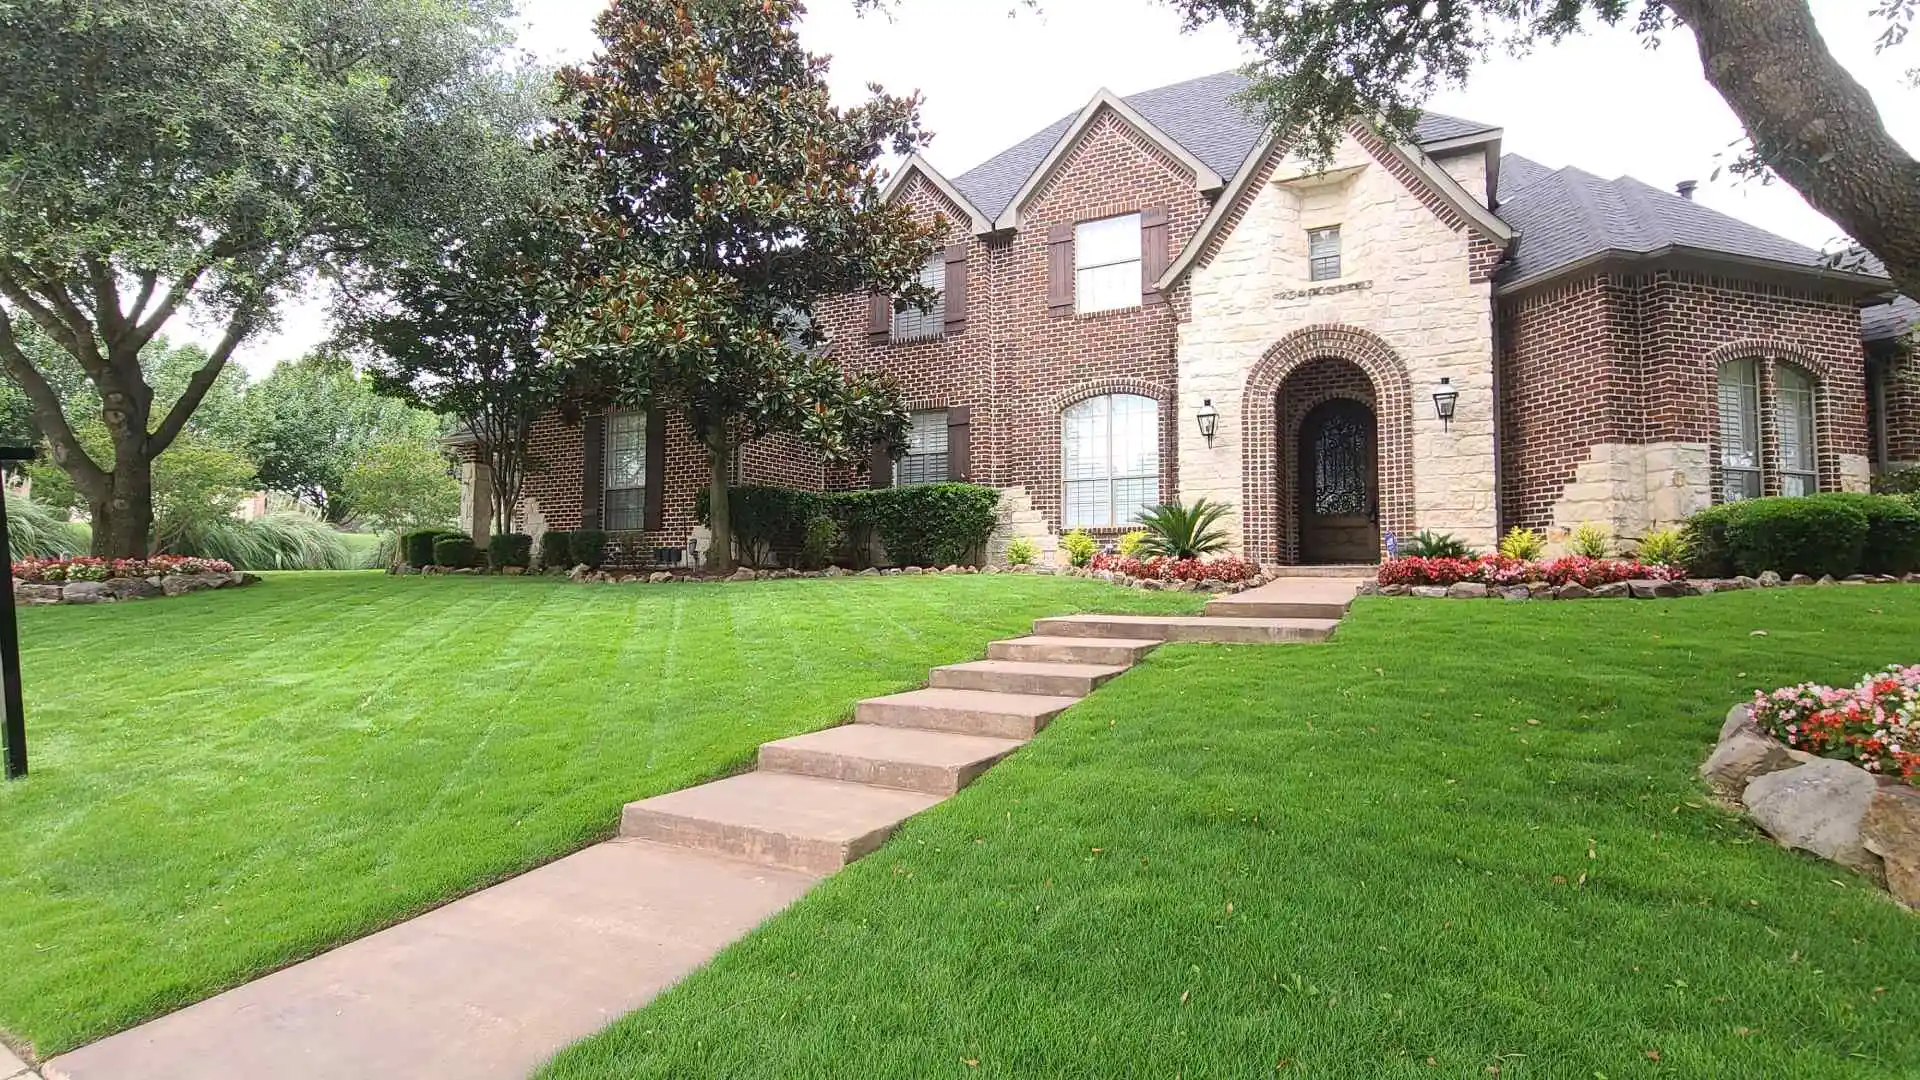 Maintained lawn and Landscape done by Arboreal professionals in Rockwall, TX.